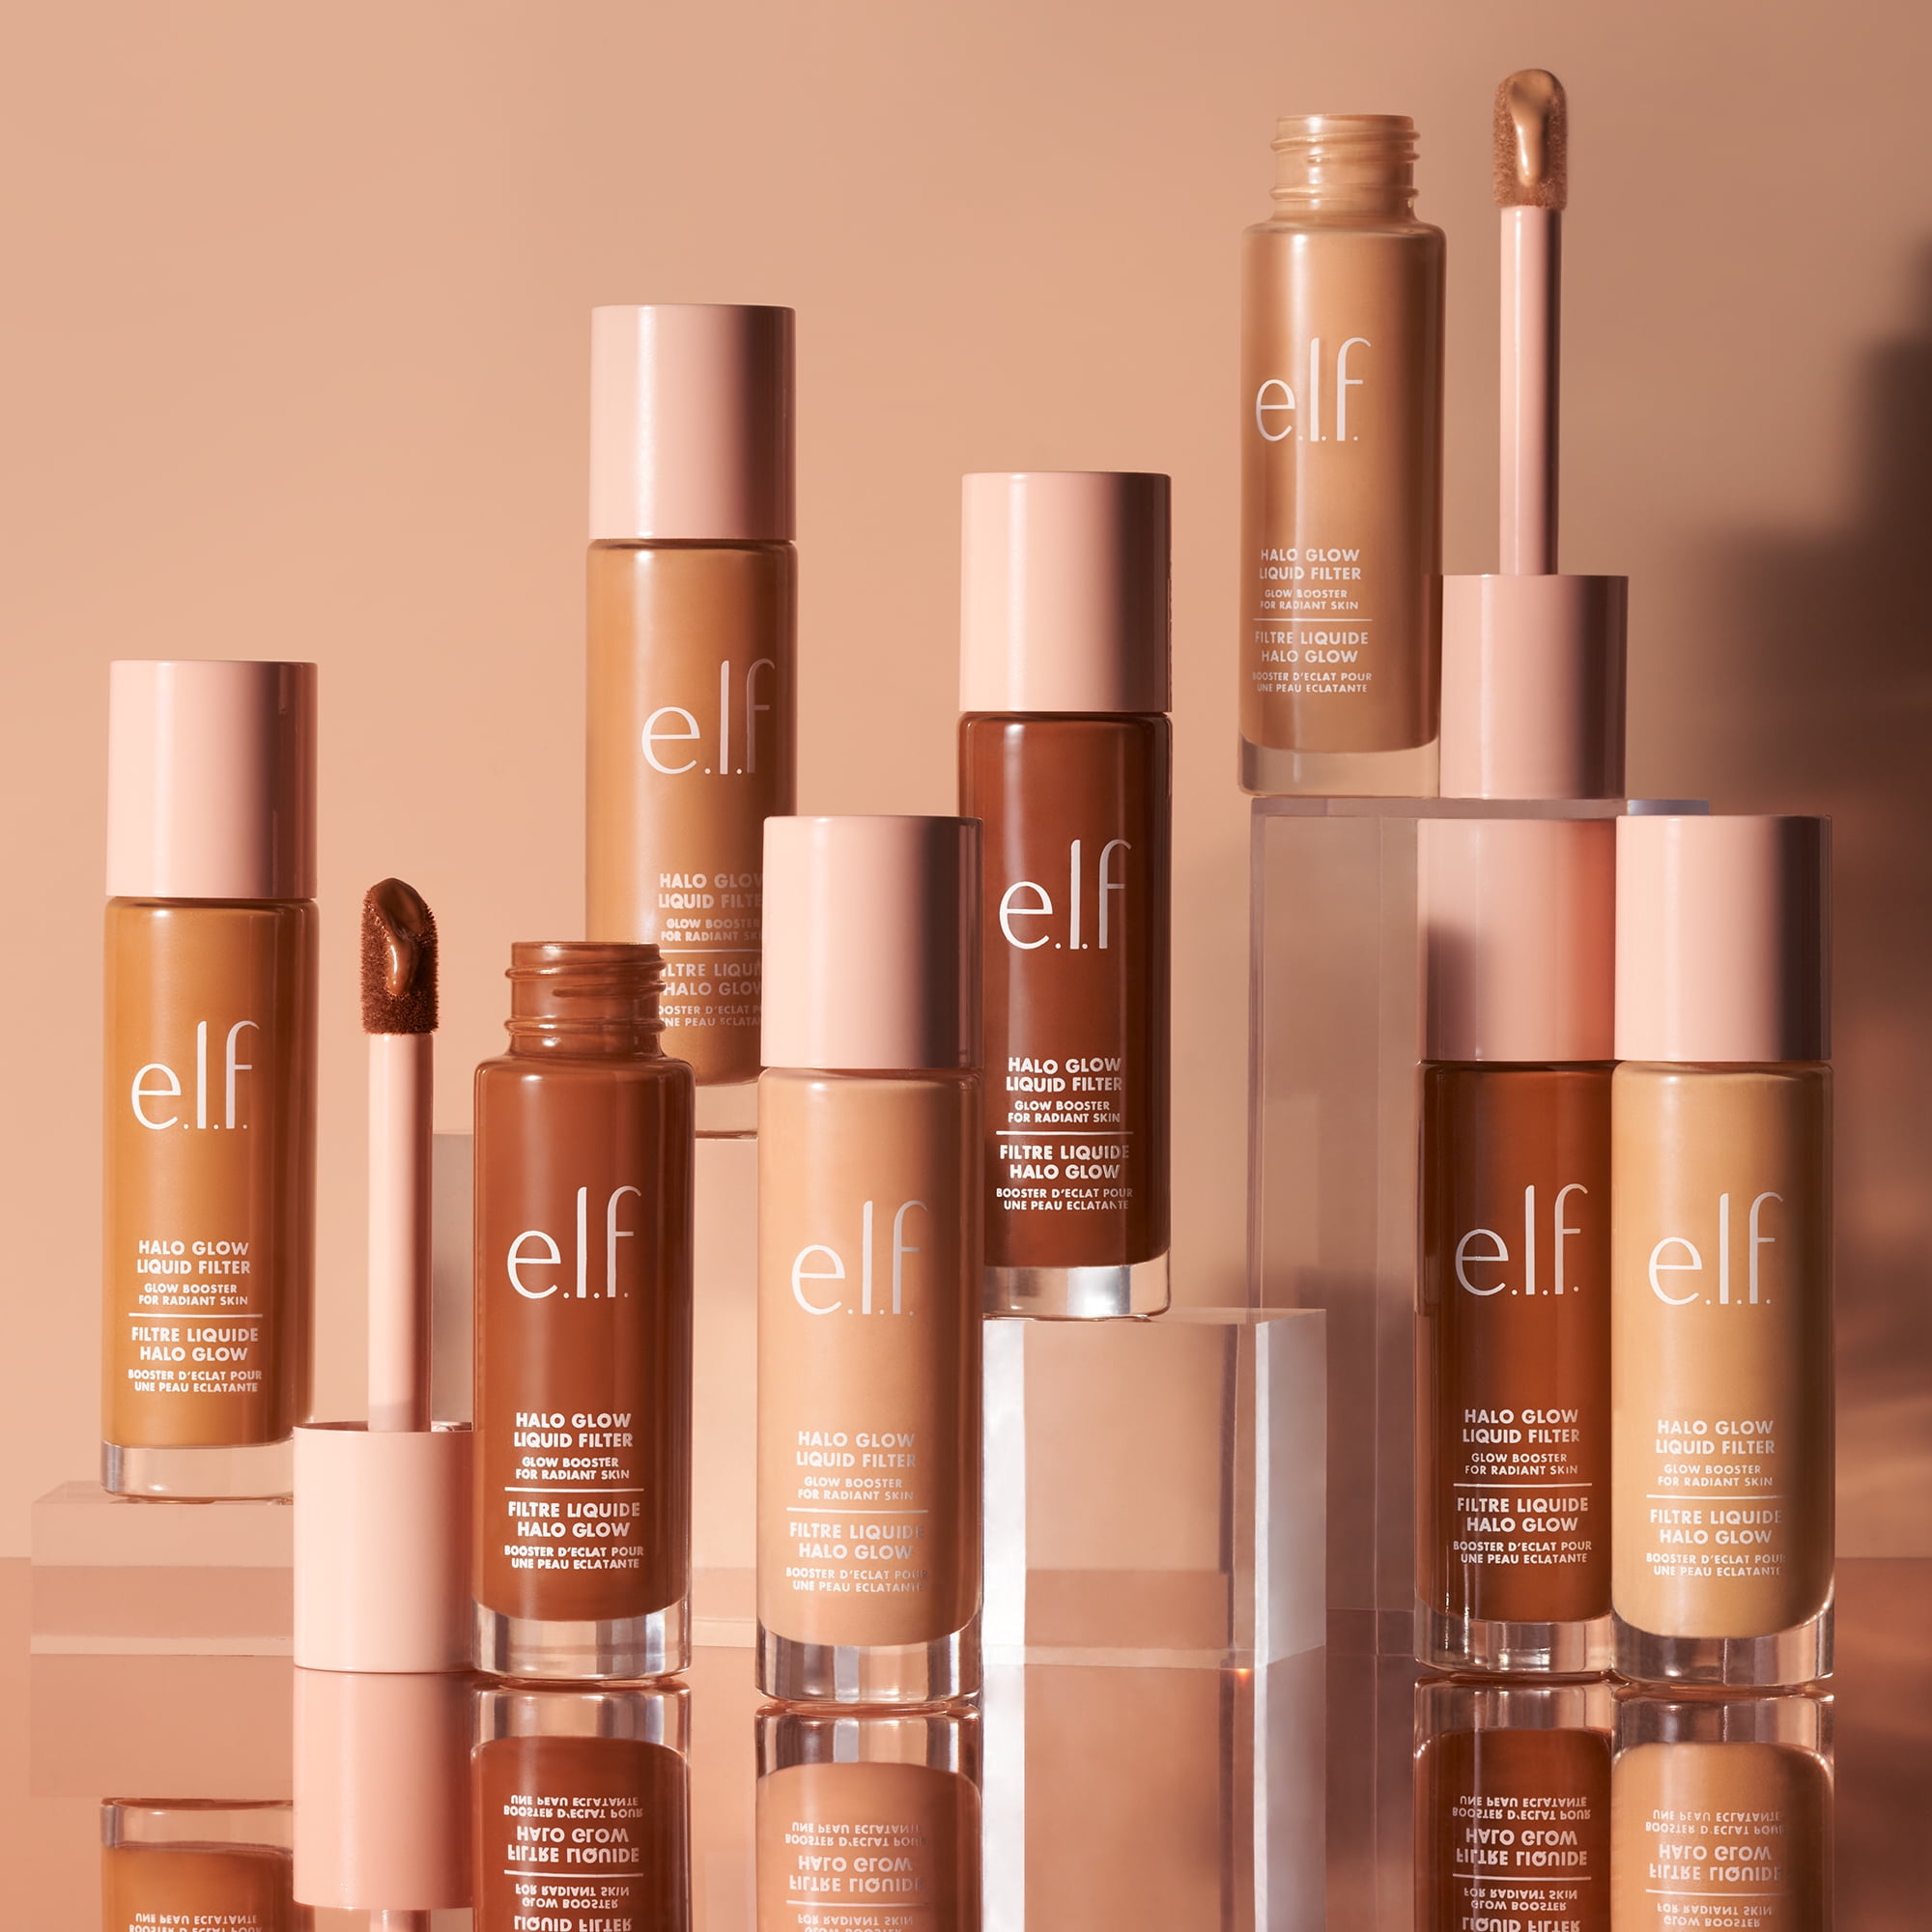 NEW ELF HALO GLOW LIQUID FILTER  *watch this if you have oily skin* 